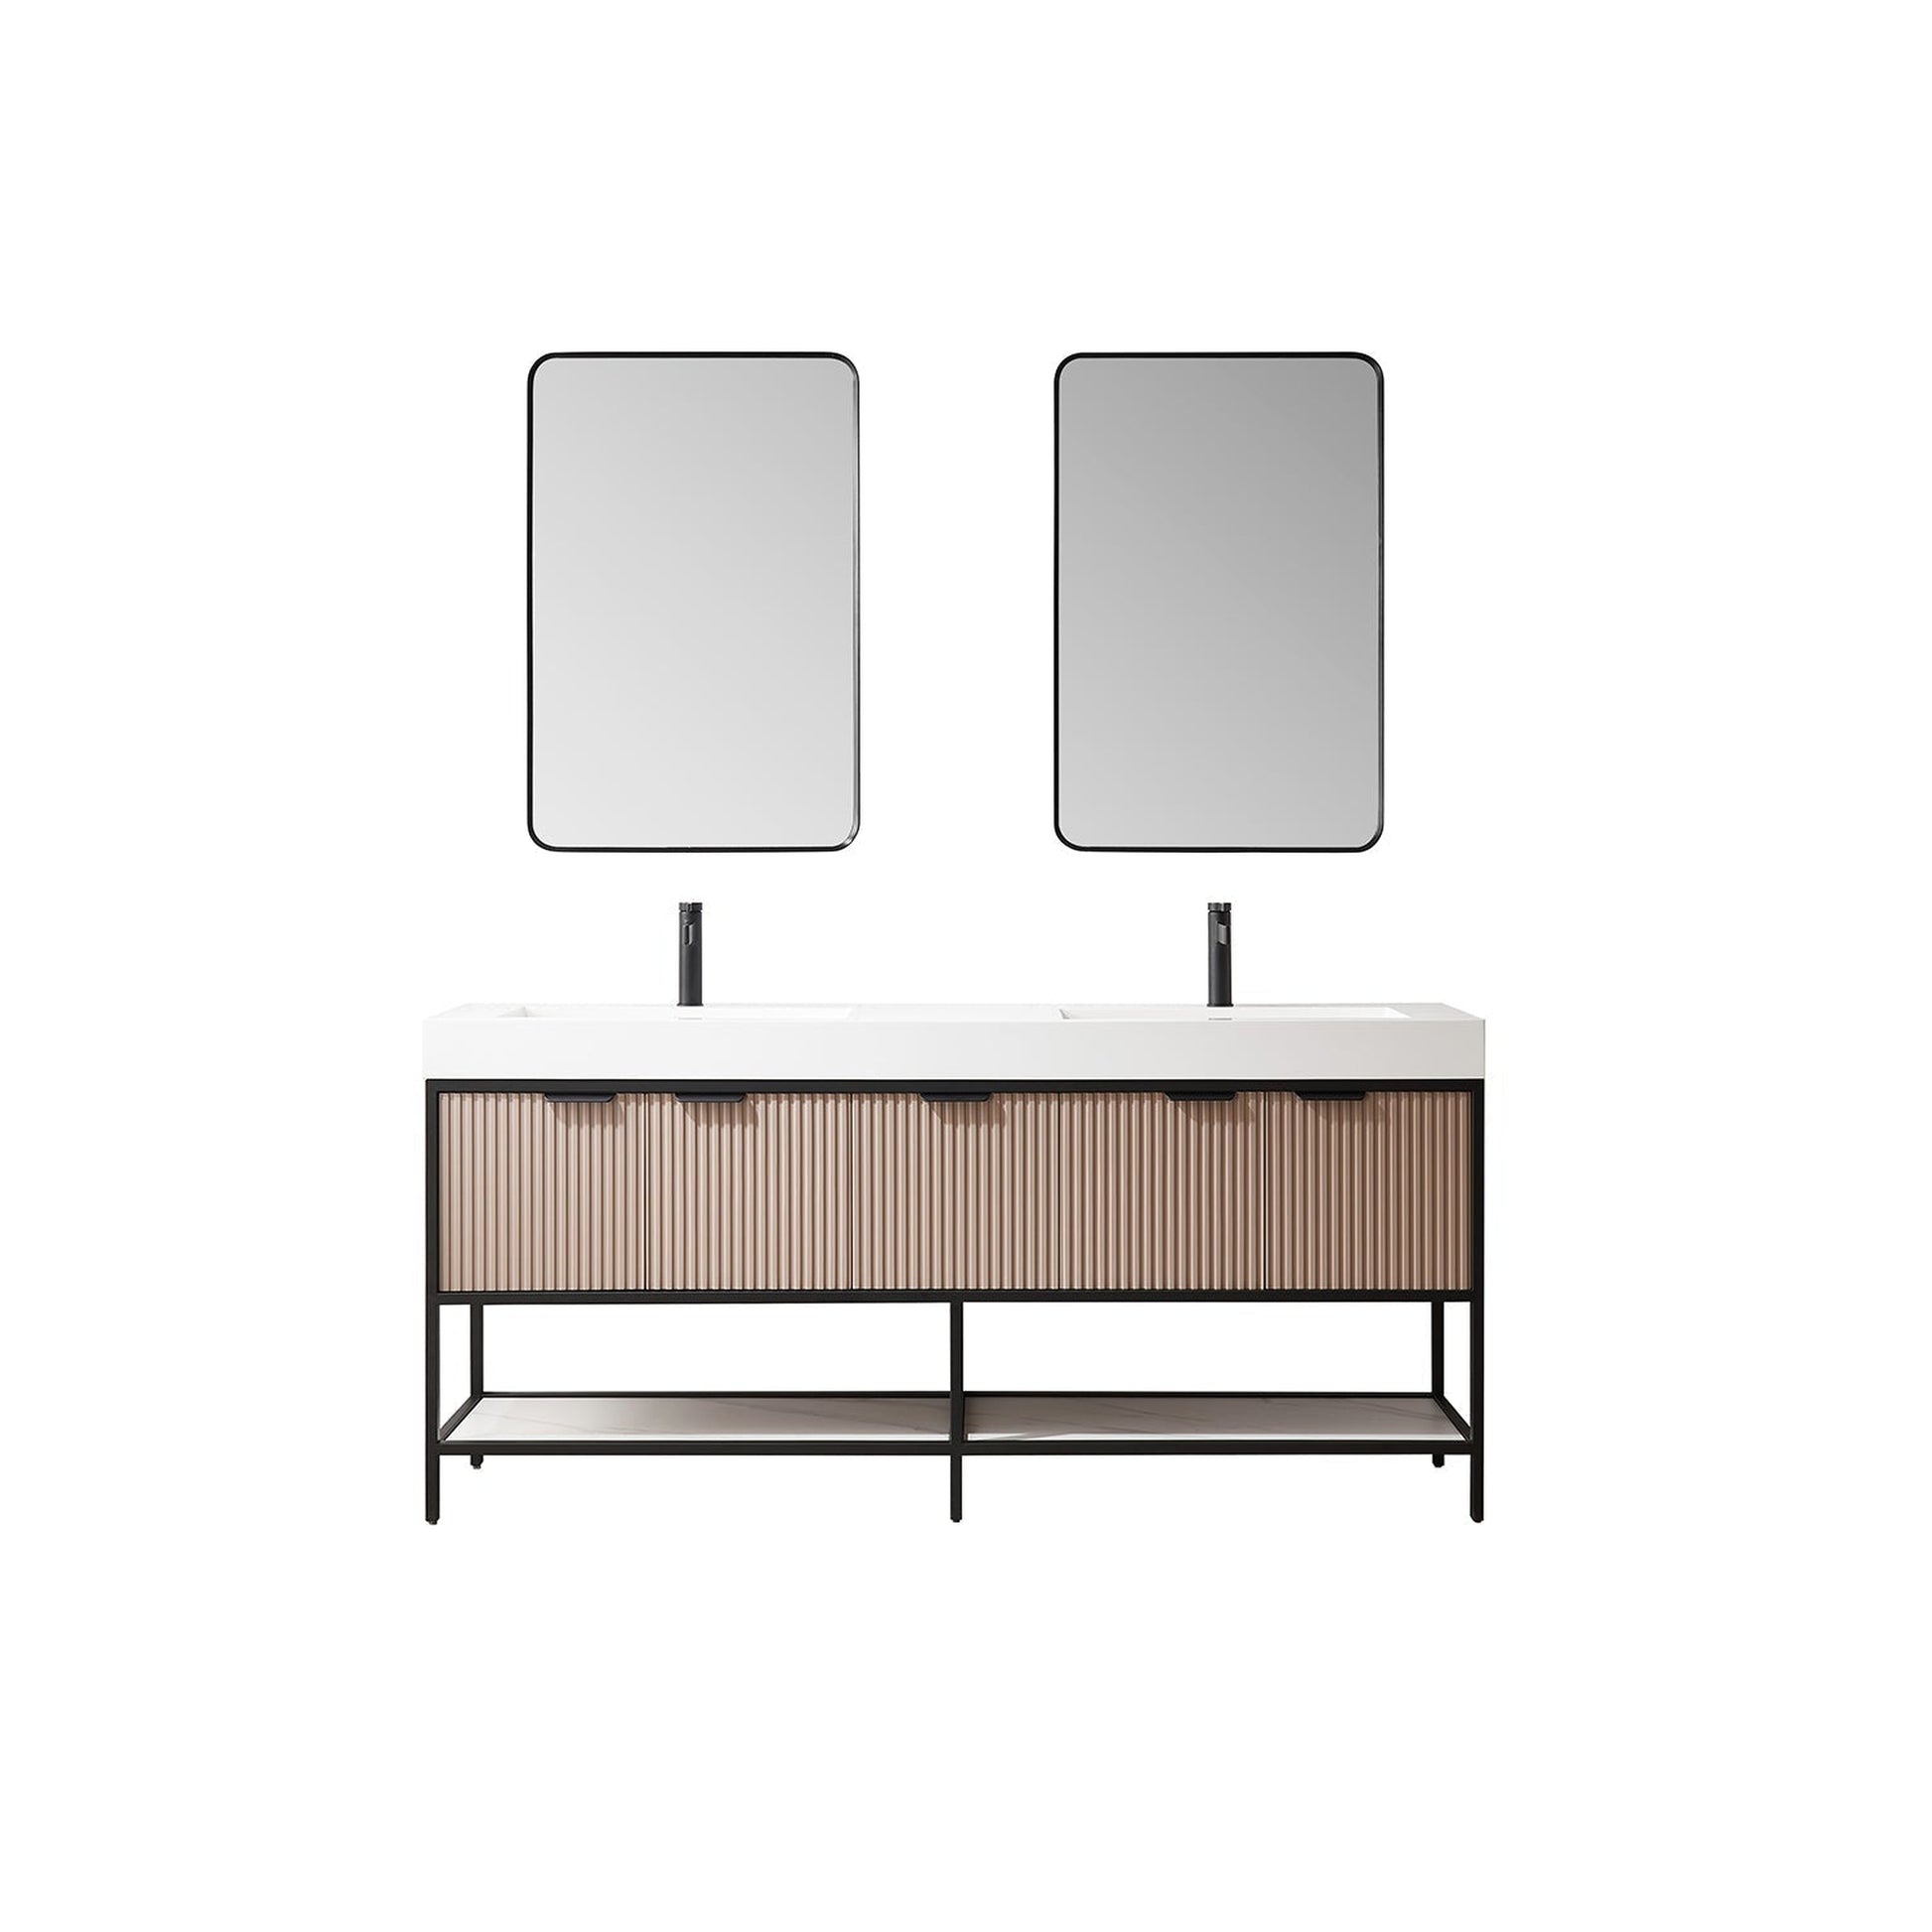 Vinnova Marcilla 72" Double Sink Bath Vanity In Almond Coffee With One-Piece Composite Stone Sink Top And Mirror